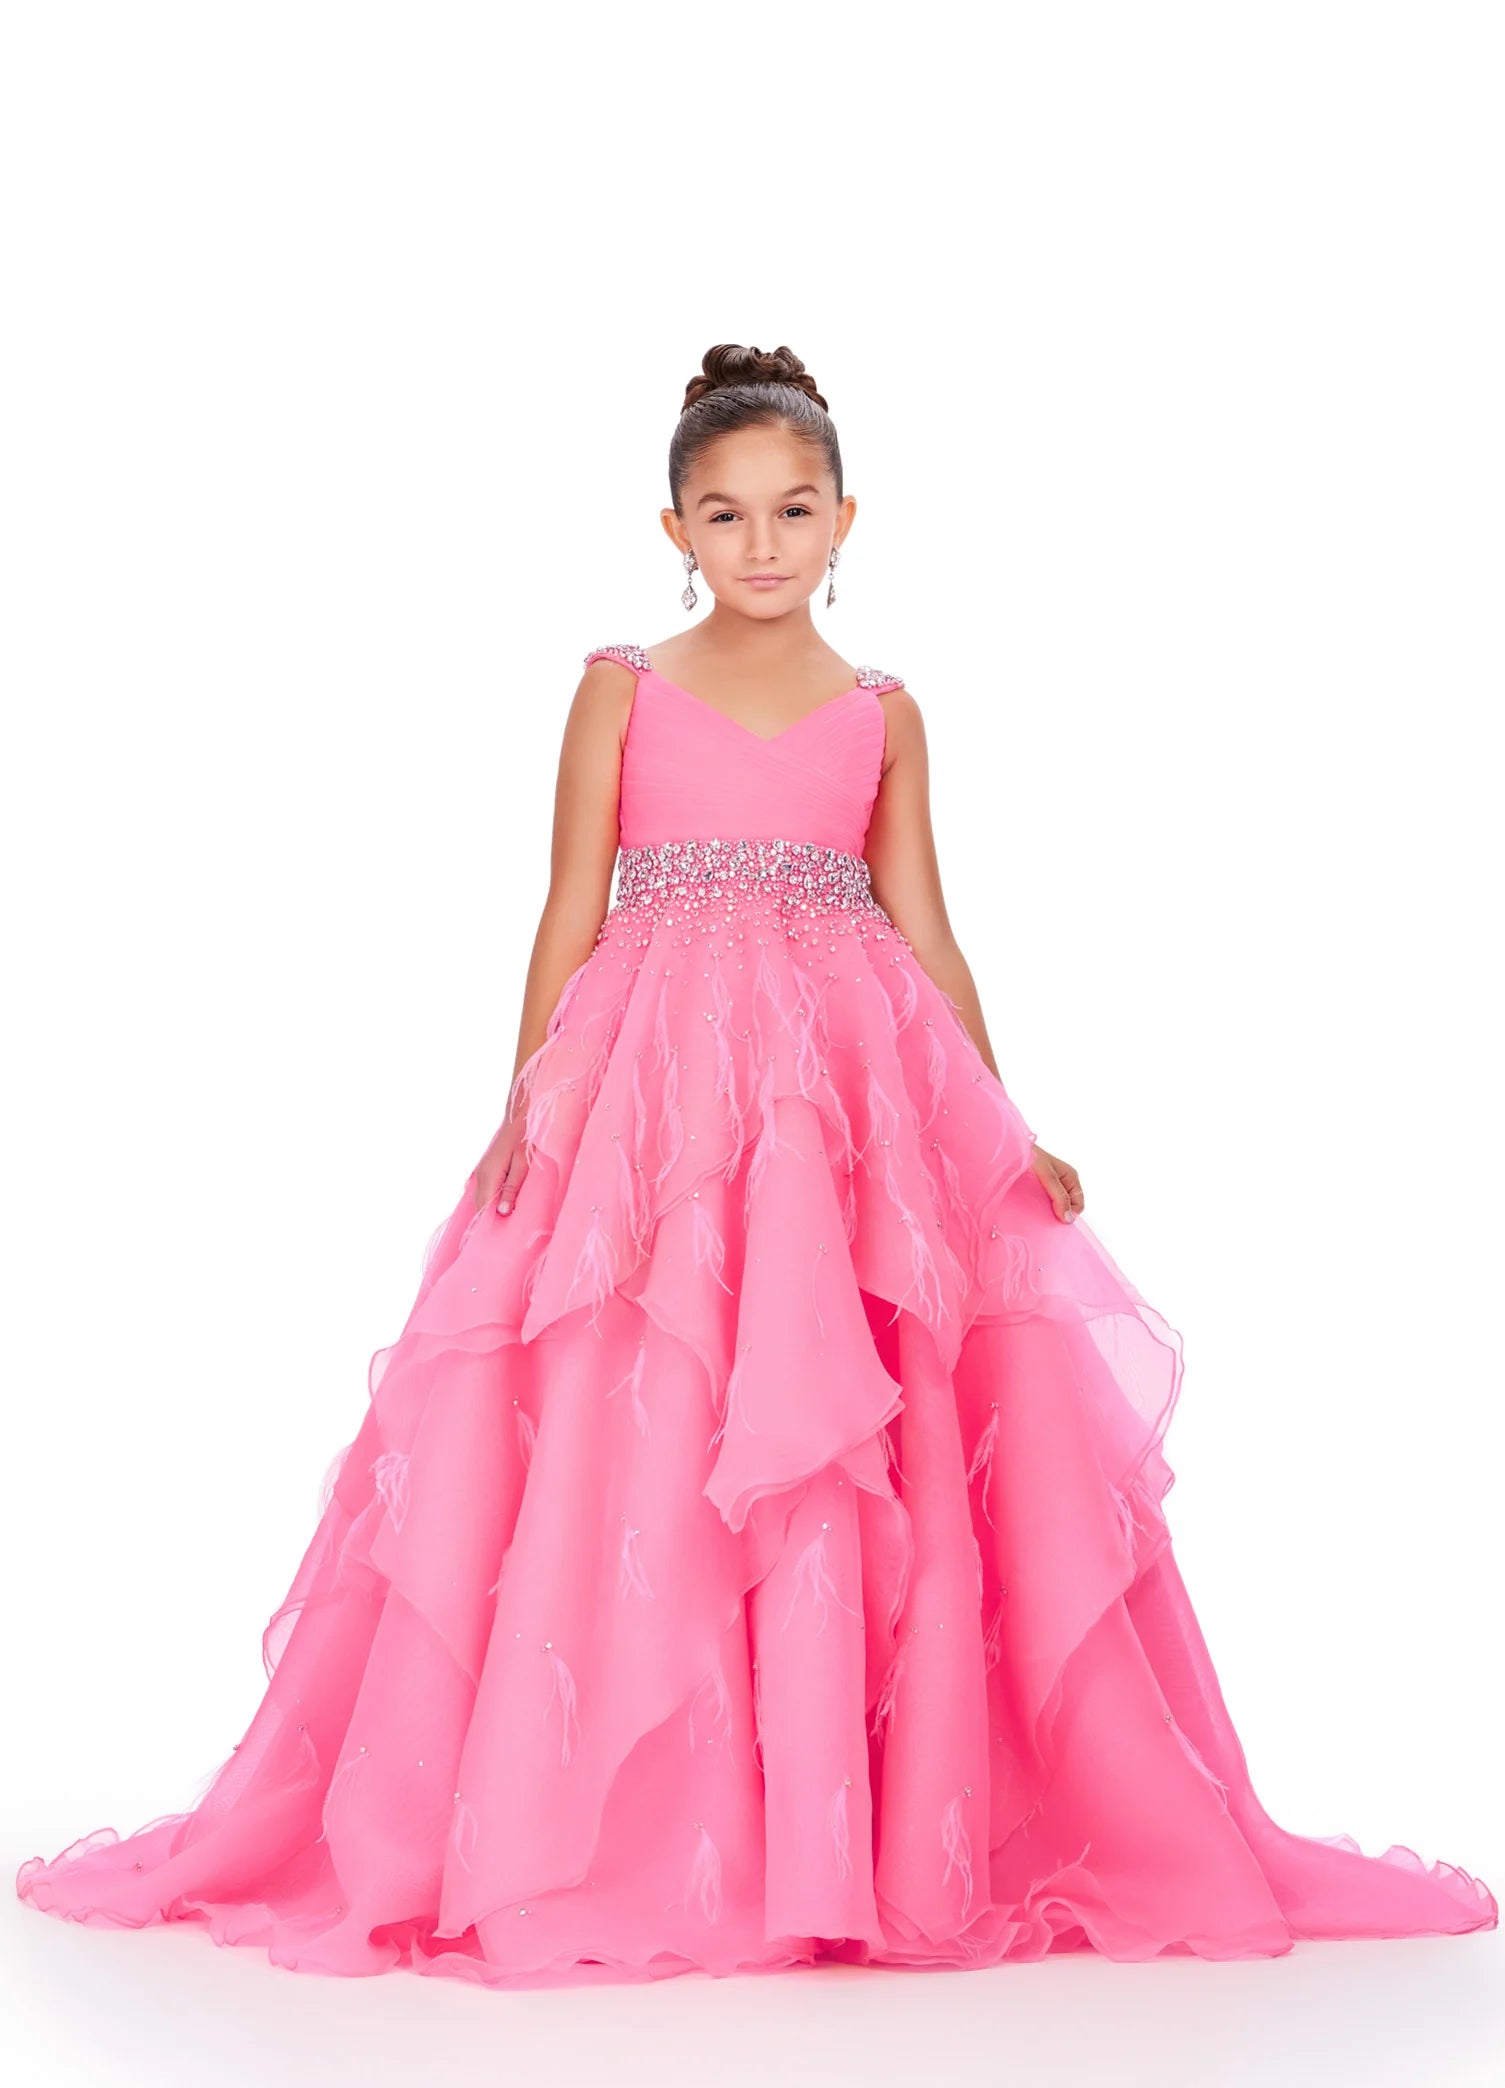 Royal Blue Kids Ball Gown Tulle Party Dress TCHK212 - TeenTina